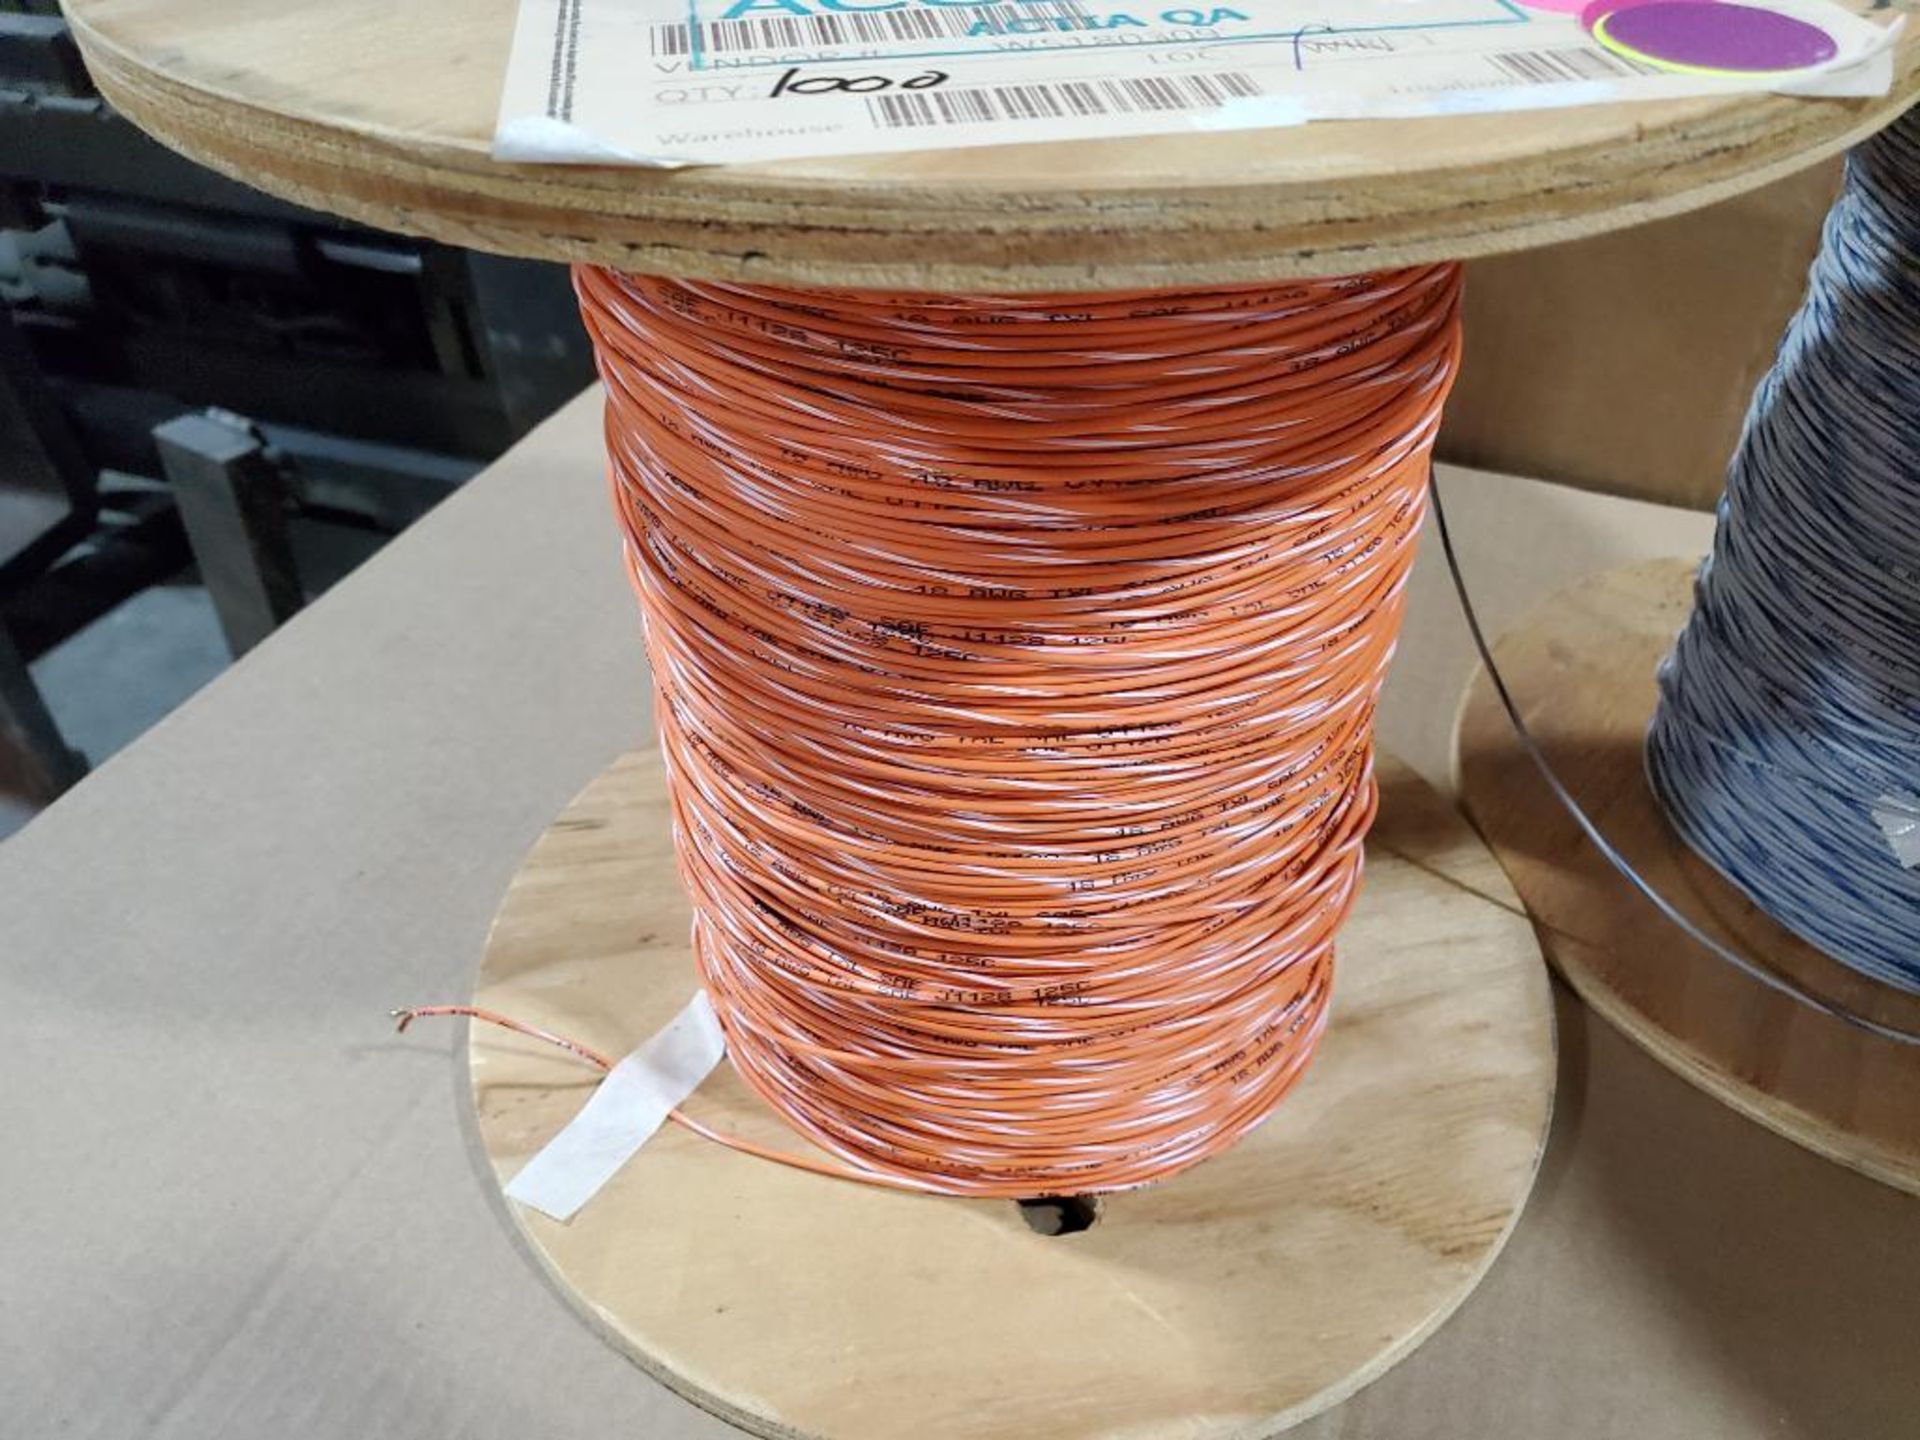 Qty 3 - 18 awg assorted copper wire. 30lbs total gross combined weight for all rolls. - Image 2 of 8